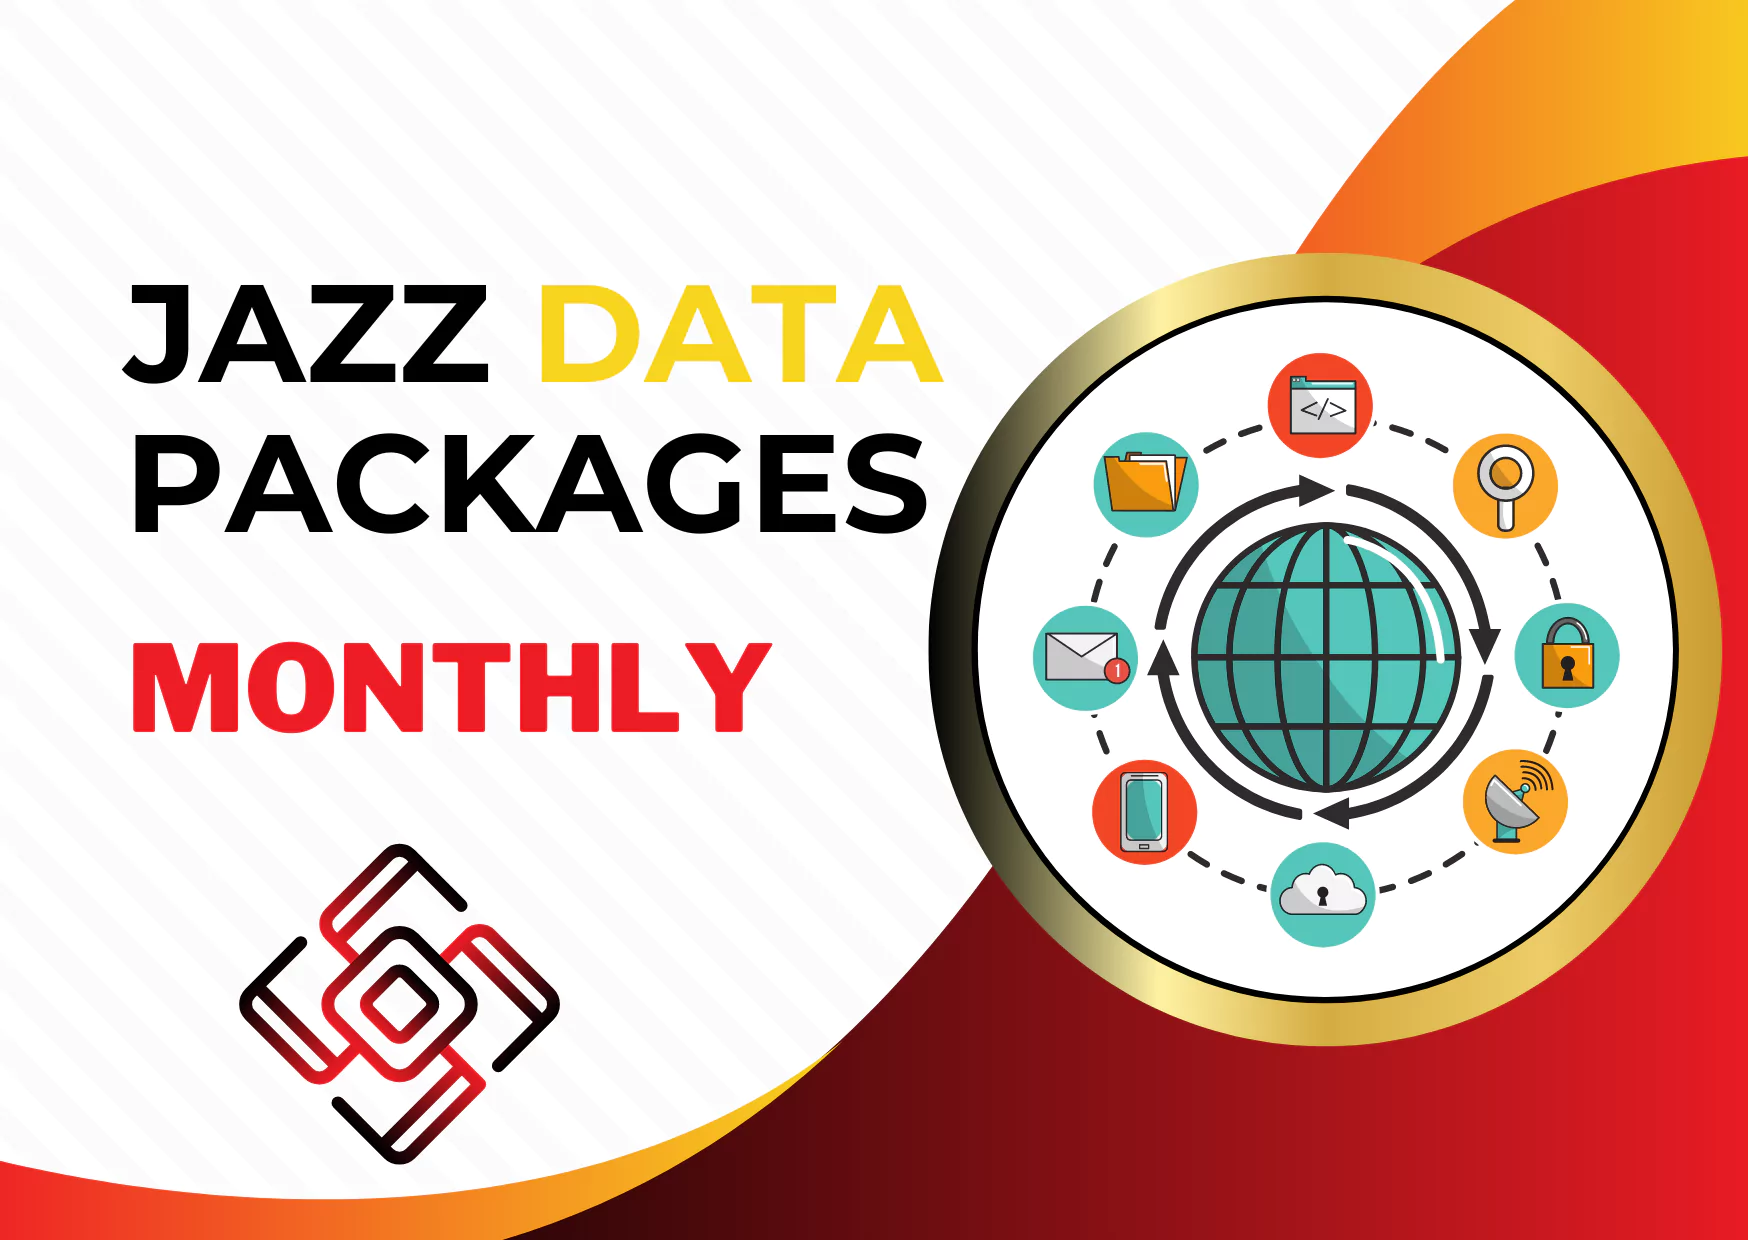 jazz monthly data package code